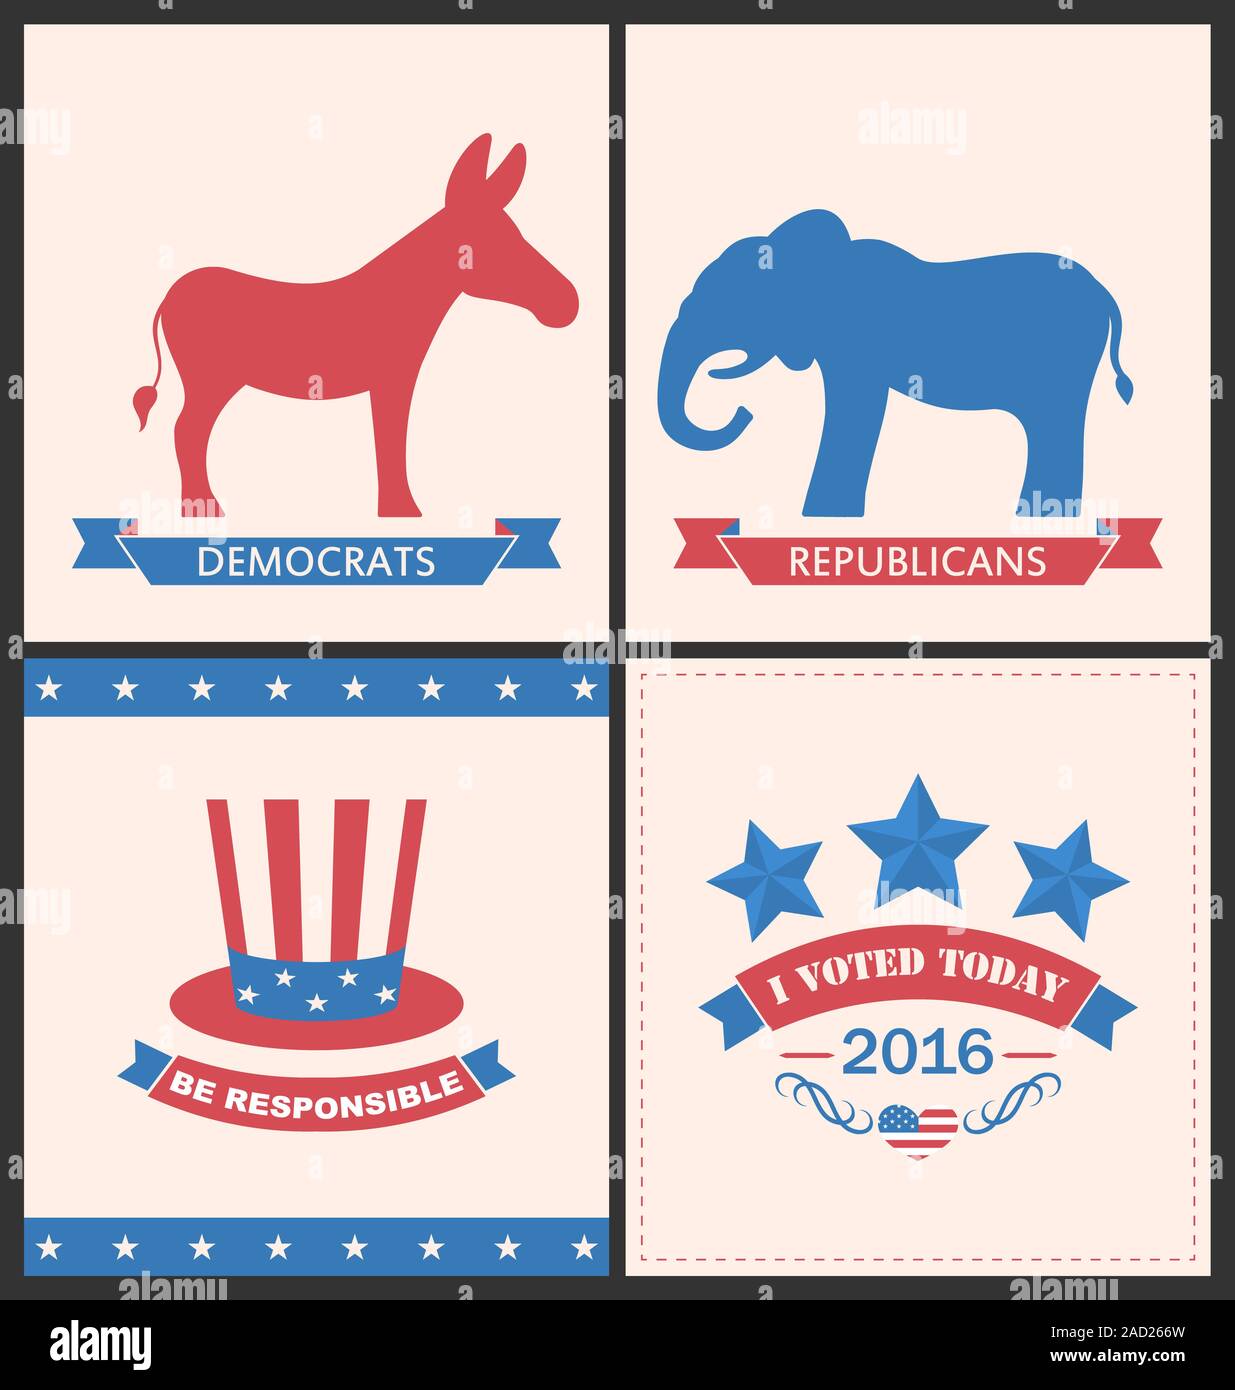 Retro Cards for Advertise of United States Political Parties Stock Photo